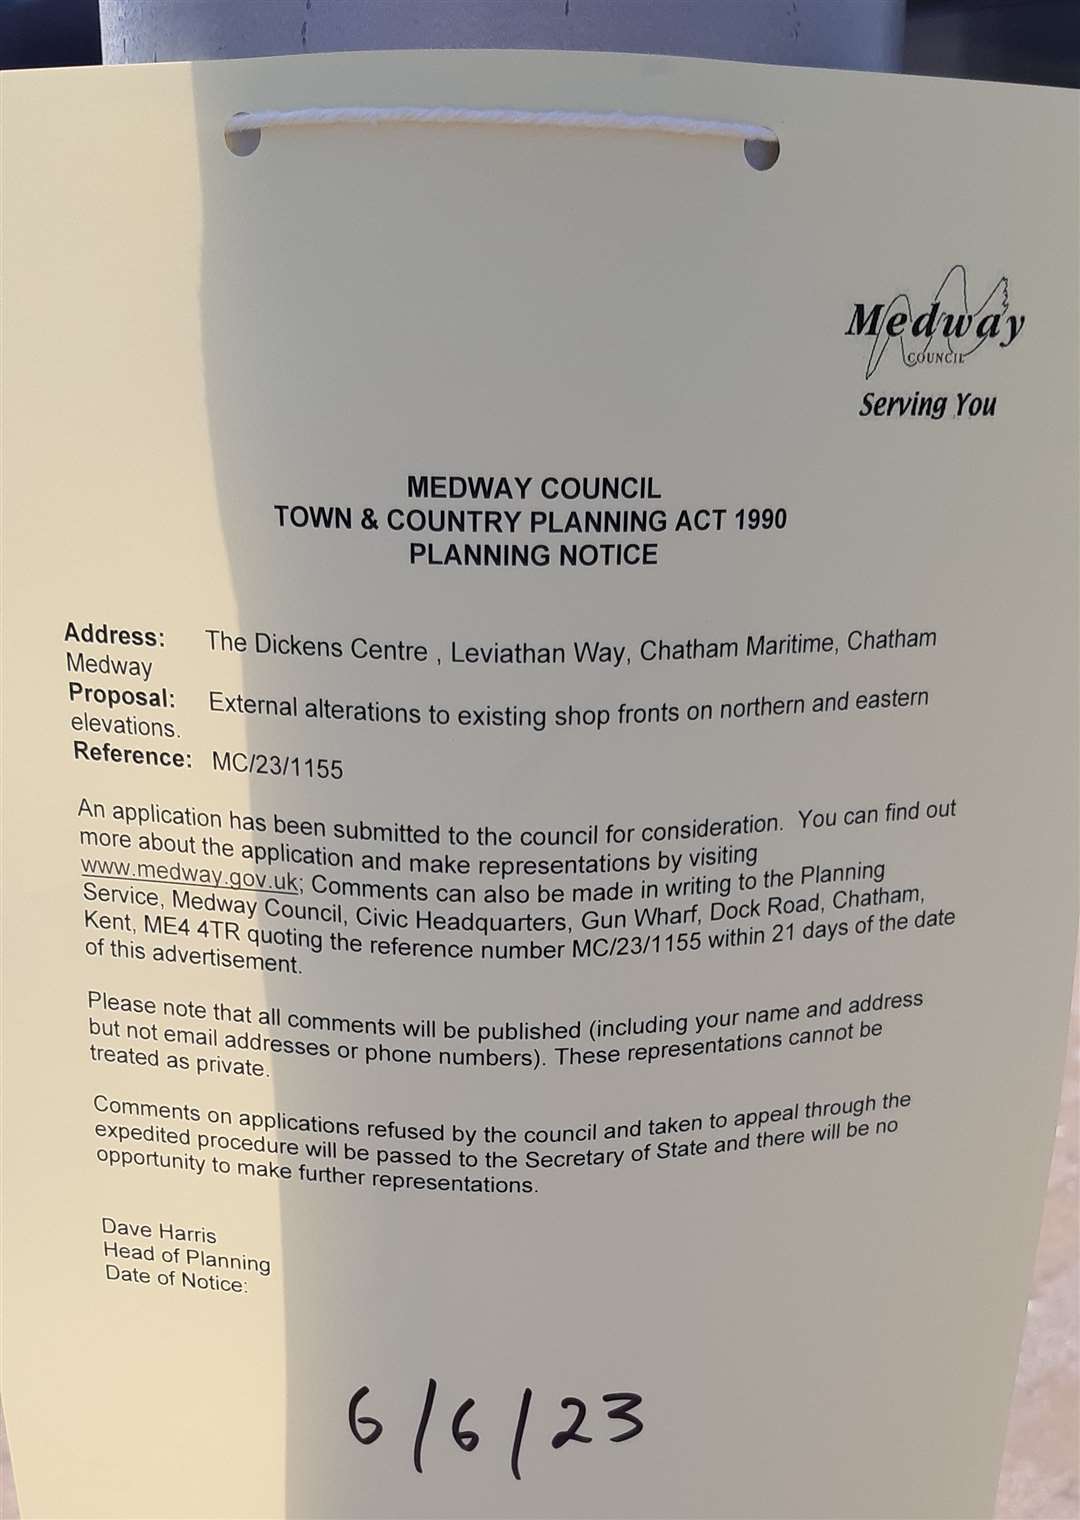 Medway Council has published a notice advising the public of an application to alter the existing shop fronts.